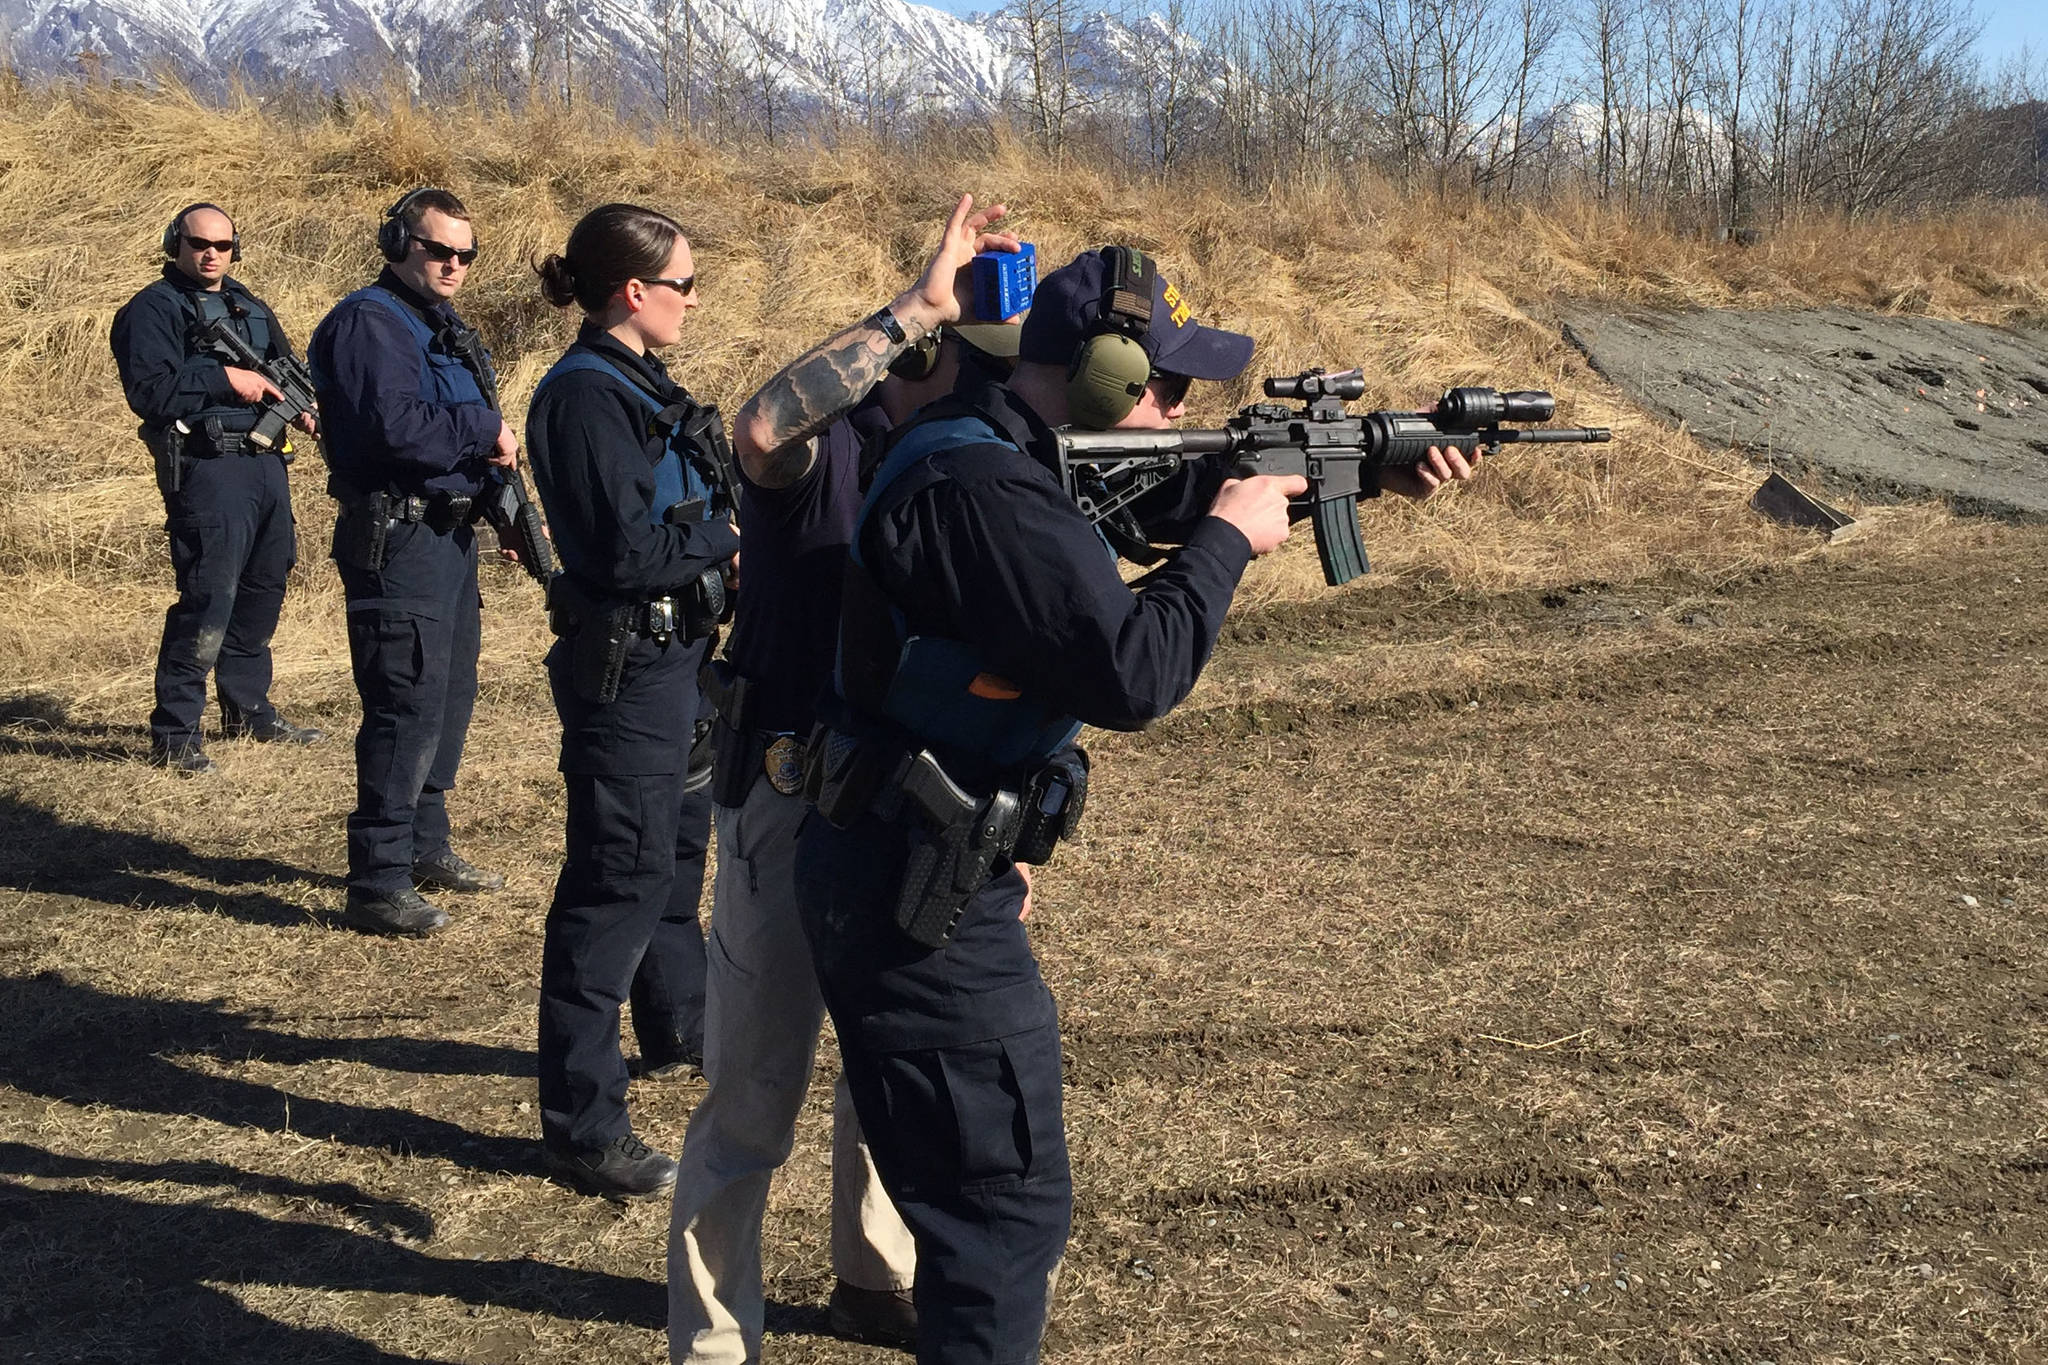 State and Wildlife Troopers participate in tactical training at the Palmer PD Range in Palmer, Alaska on Monday, April 1, 2019 as part of a week-long training on sexual assault and domestic violence. (Photo courtesy of Megan Peters/Department of Public Safety)